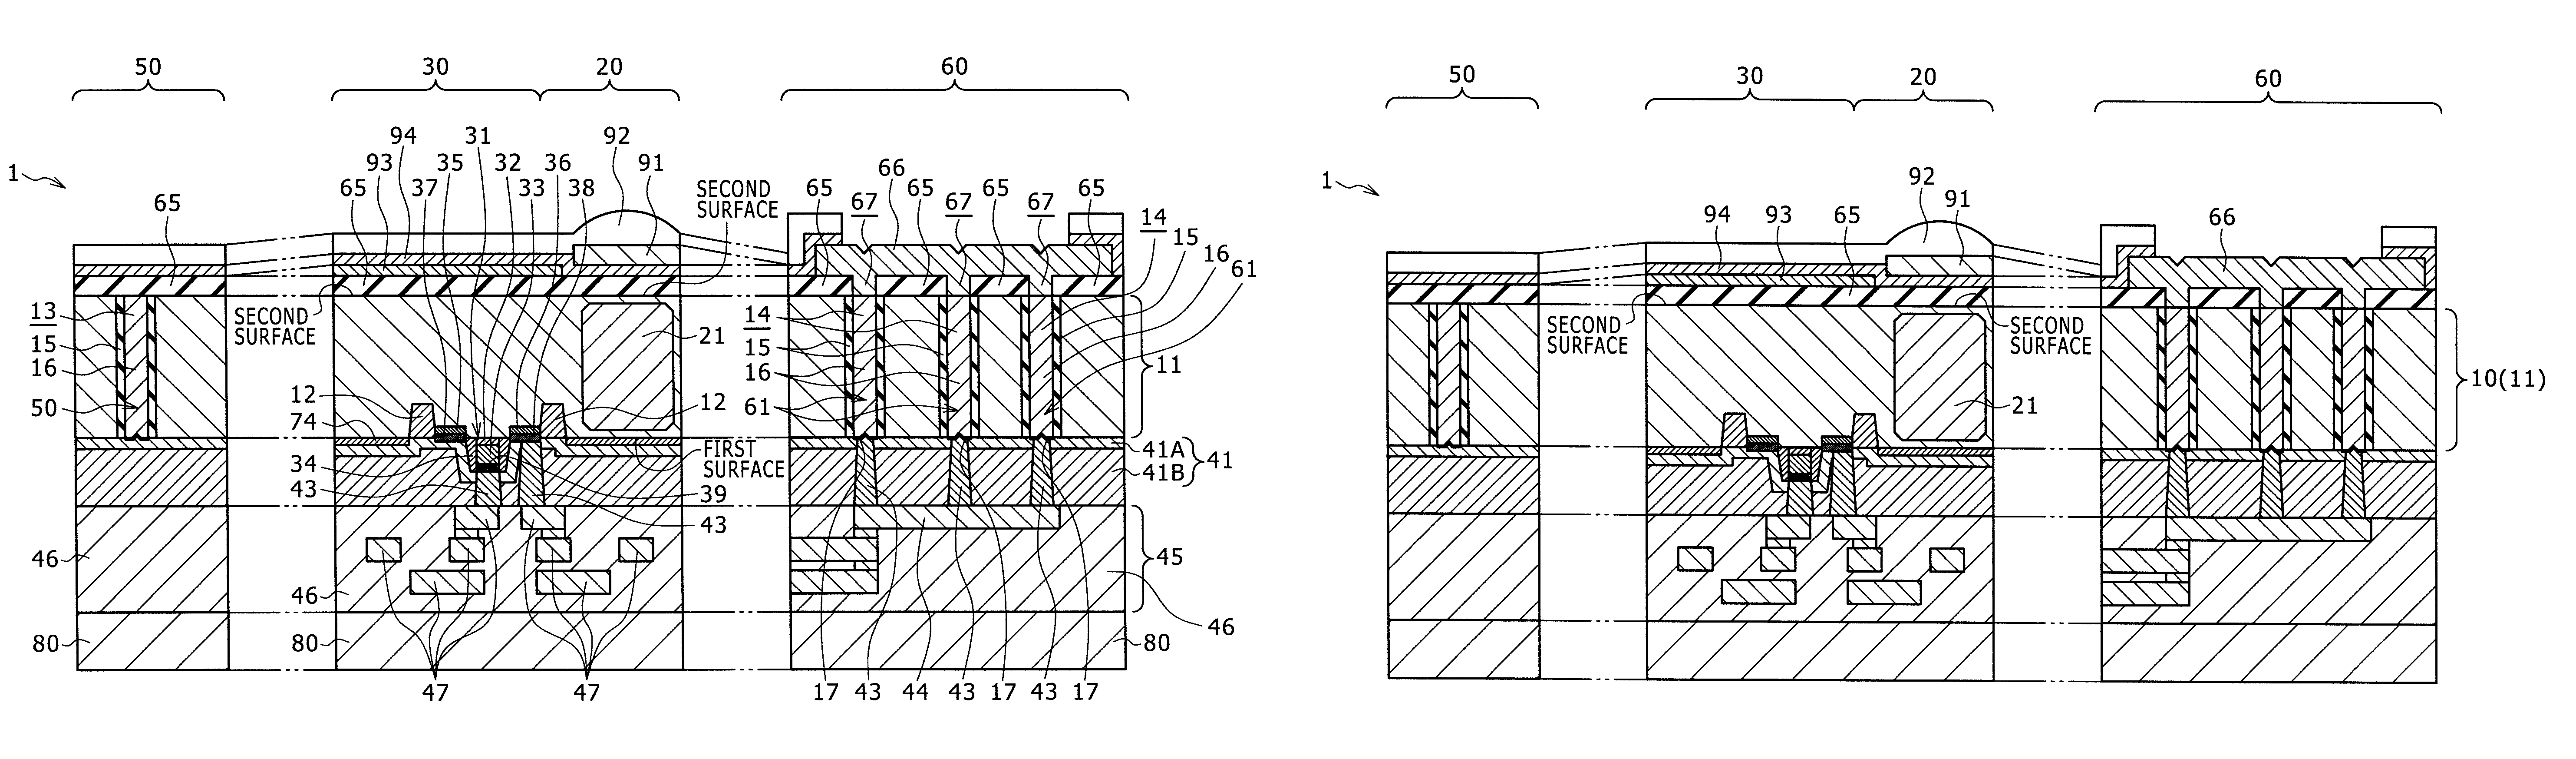 Solid-state image pickup device and a method of manufacturing the same